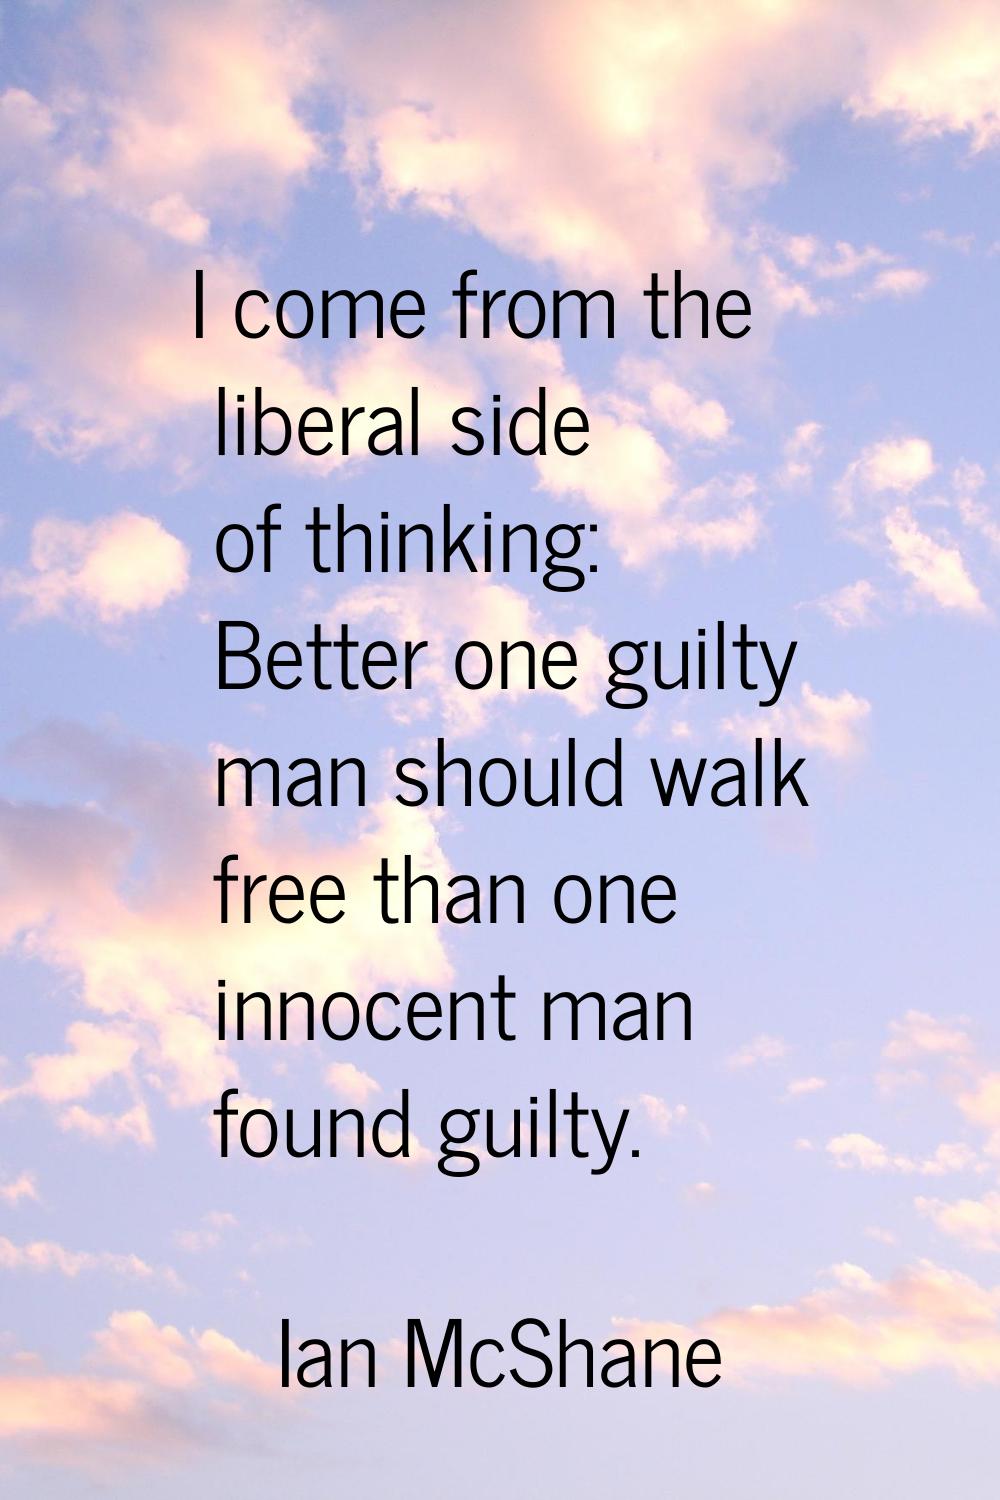 I come from the liberal side of thinking: Better one guilty man should walk free than one innocent 